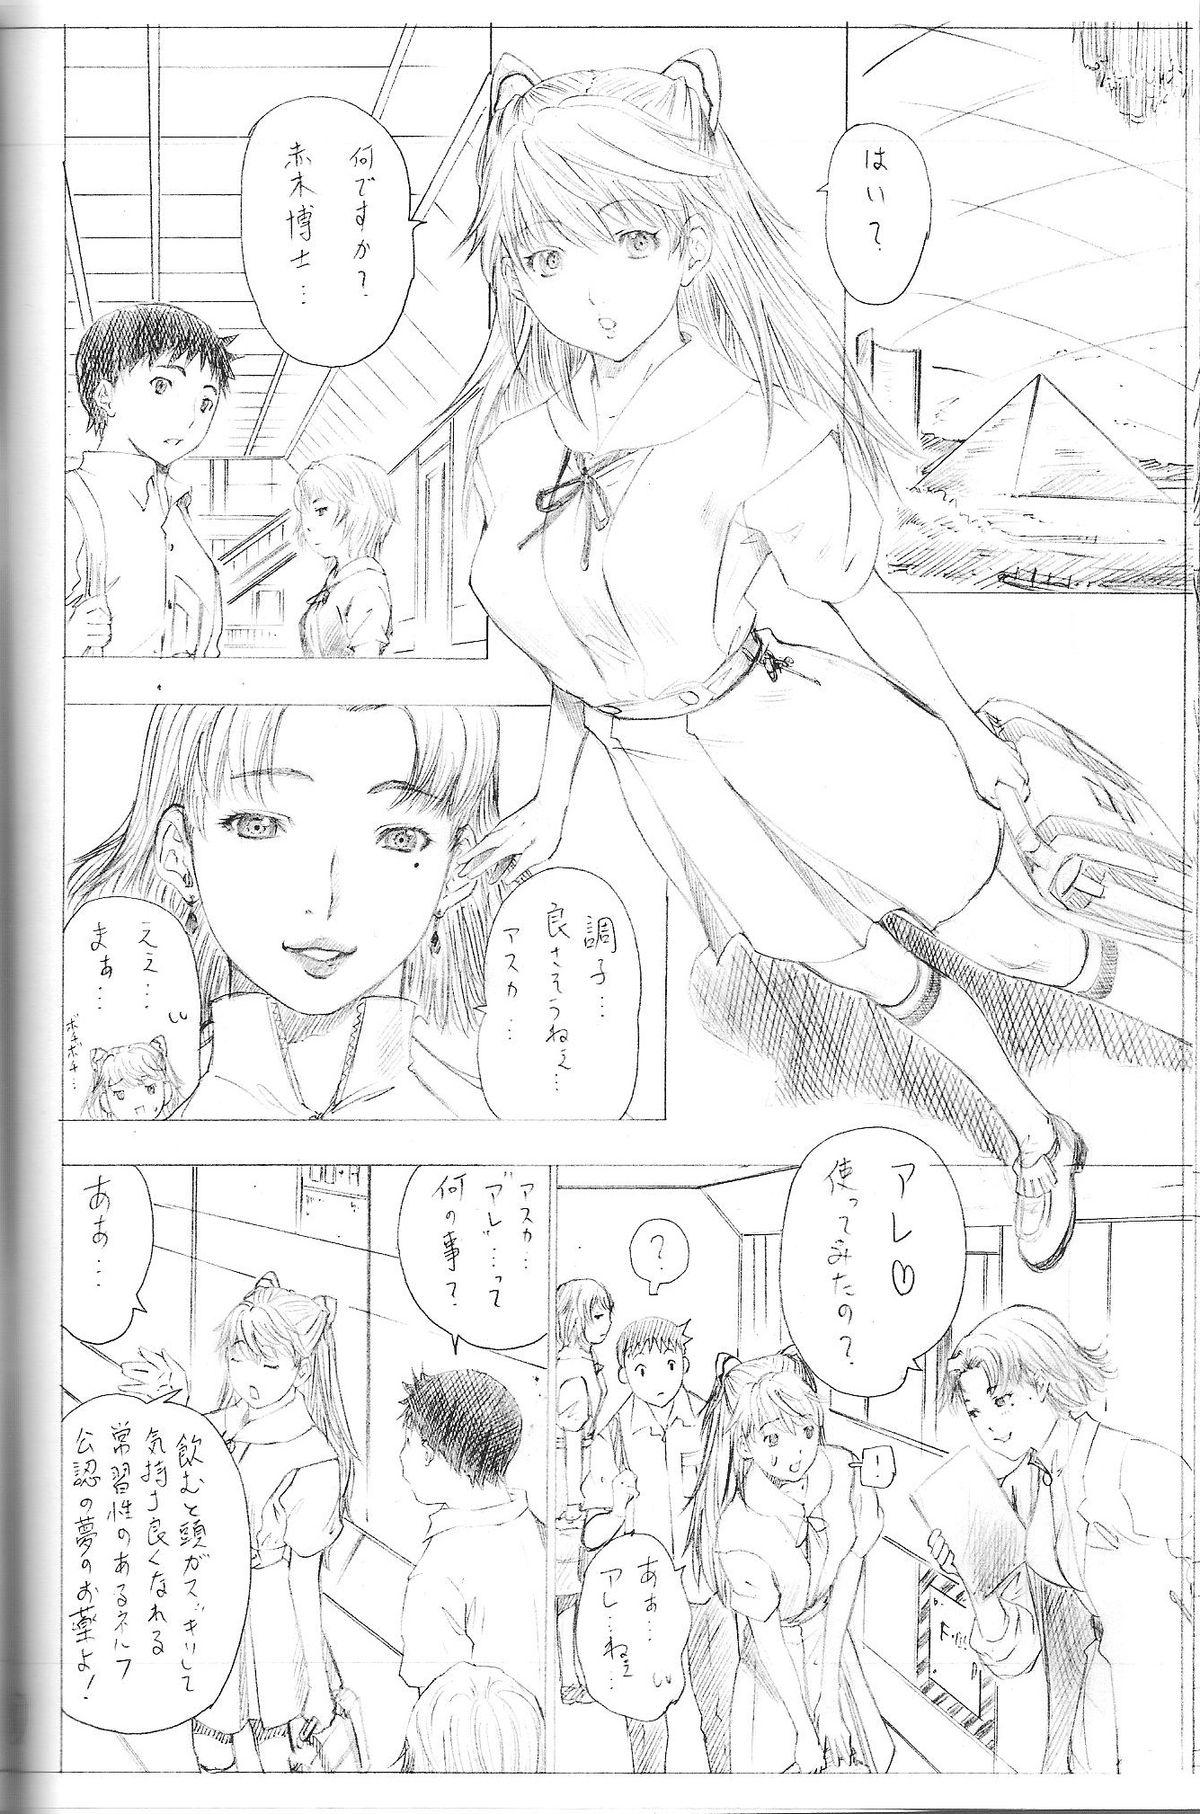 Lolicon 2010 ONLY ASKA WINTER pilot version - Neon genesis evangelion Food - Page 10